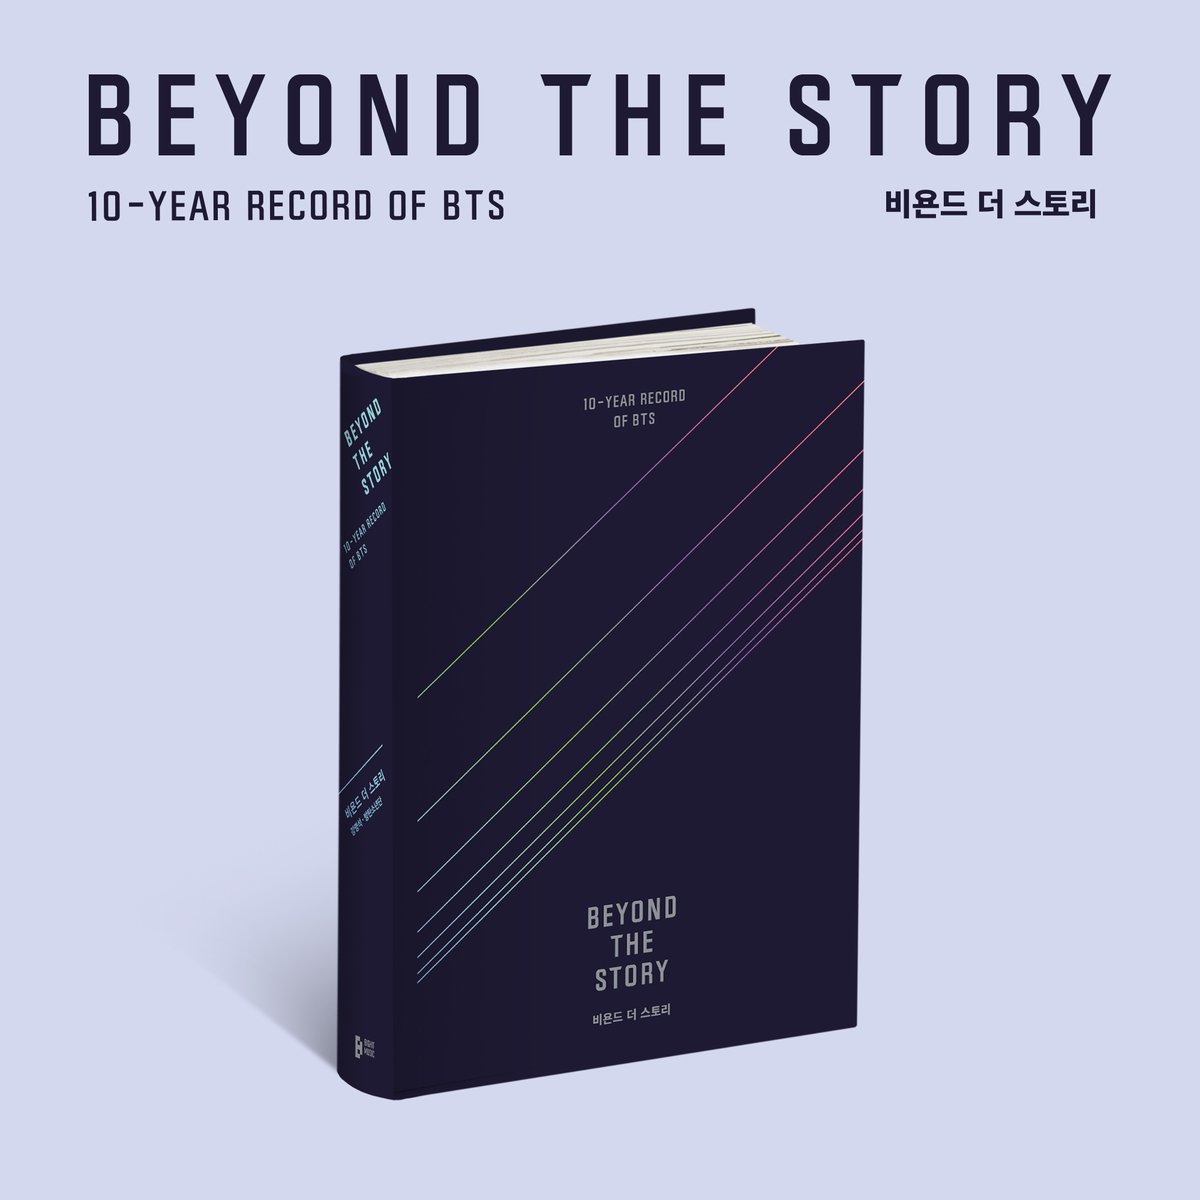 ‘BEYOND THE STORY : 10-YEAR RECORD OF BTS’

The First Ever Official Book
방탄소년단 데뷔 10주년 오피셜 북 출간
(youtu.be/mxXbzibBuOE)

📖 Original Edition
Pre-order: 23. 6. 15. 11:00AM (KST)
Release: 23. 7. 9. 7:09AM (KST)

#BEYOND_THE_STORY #BTS #방탄소년단